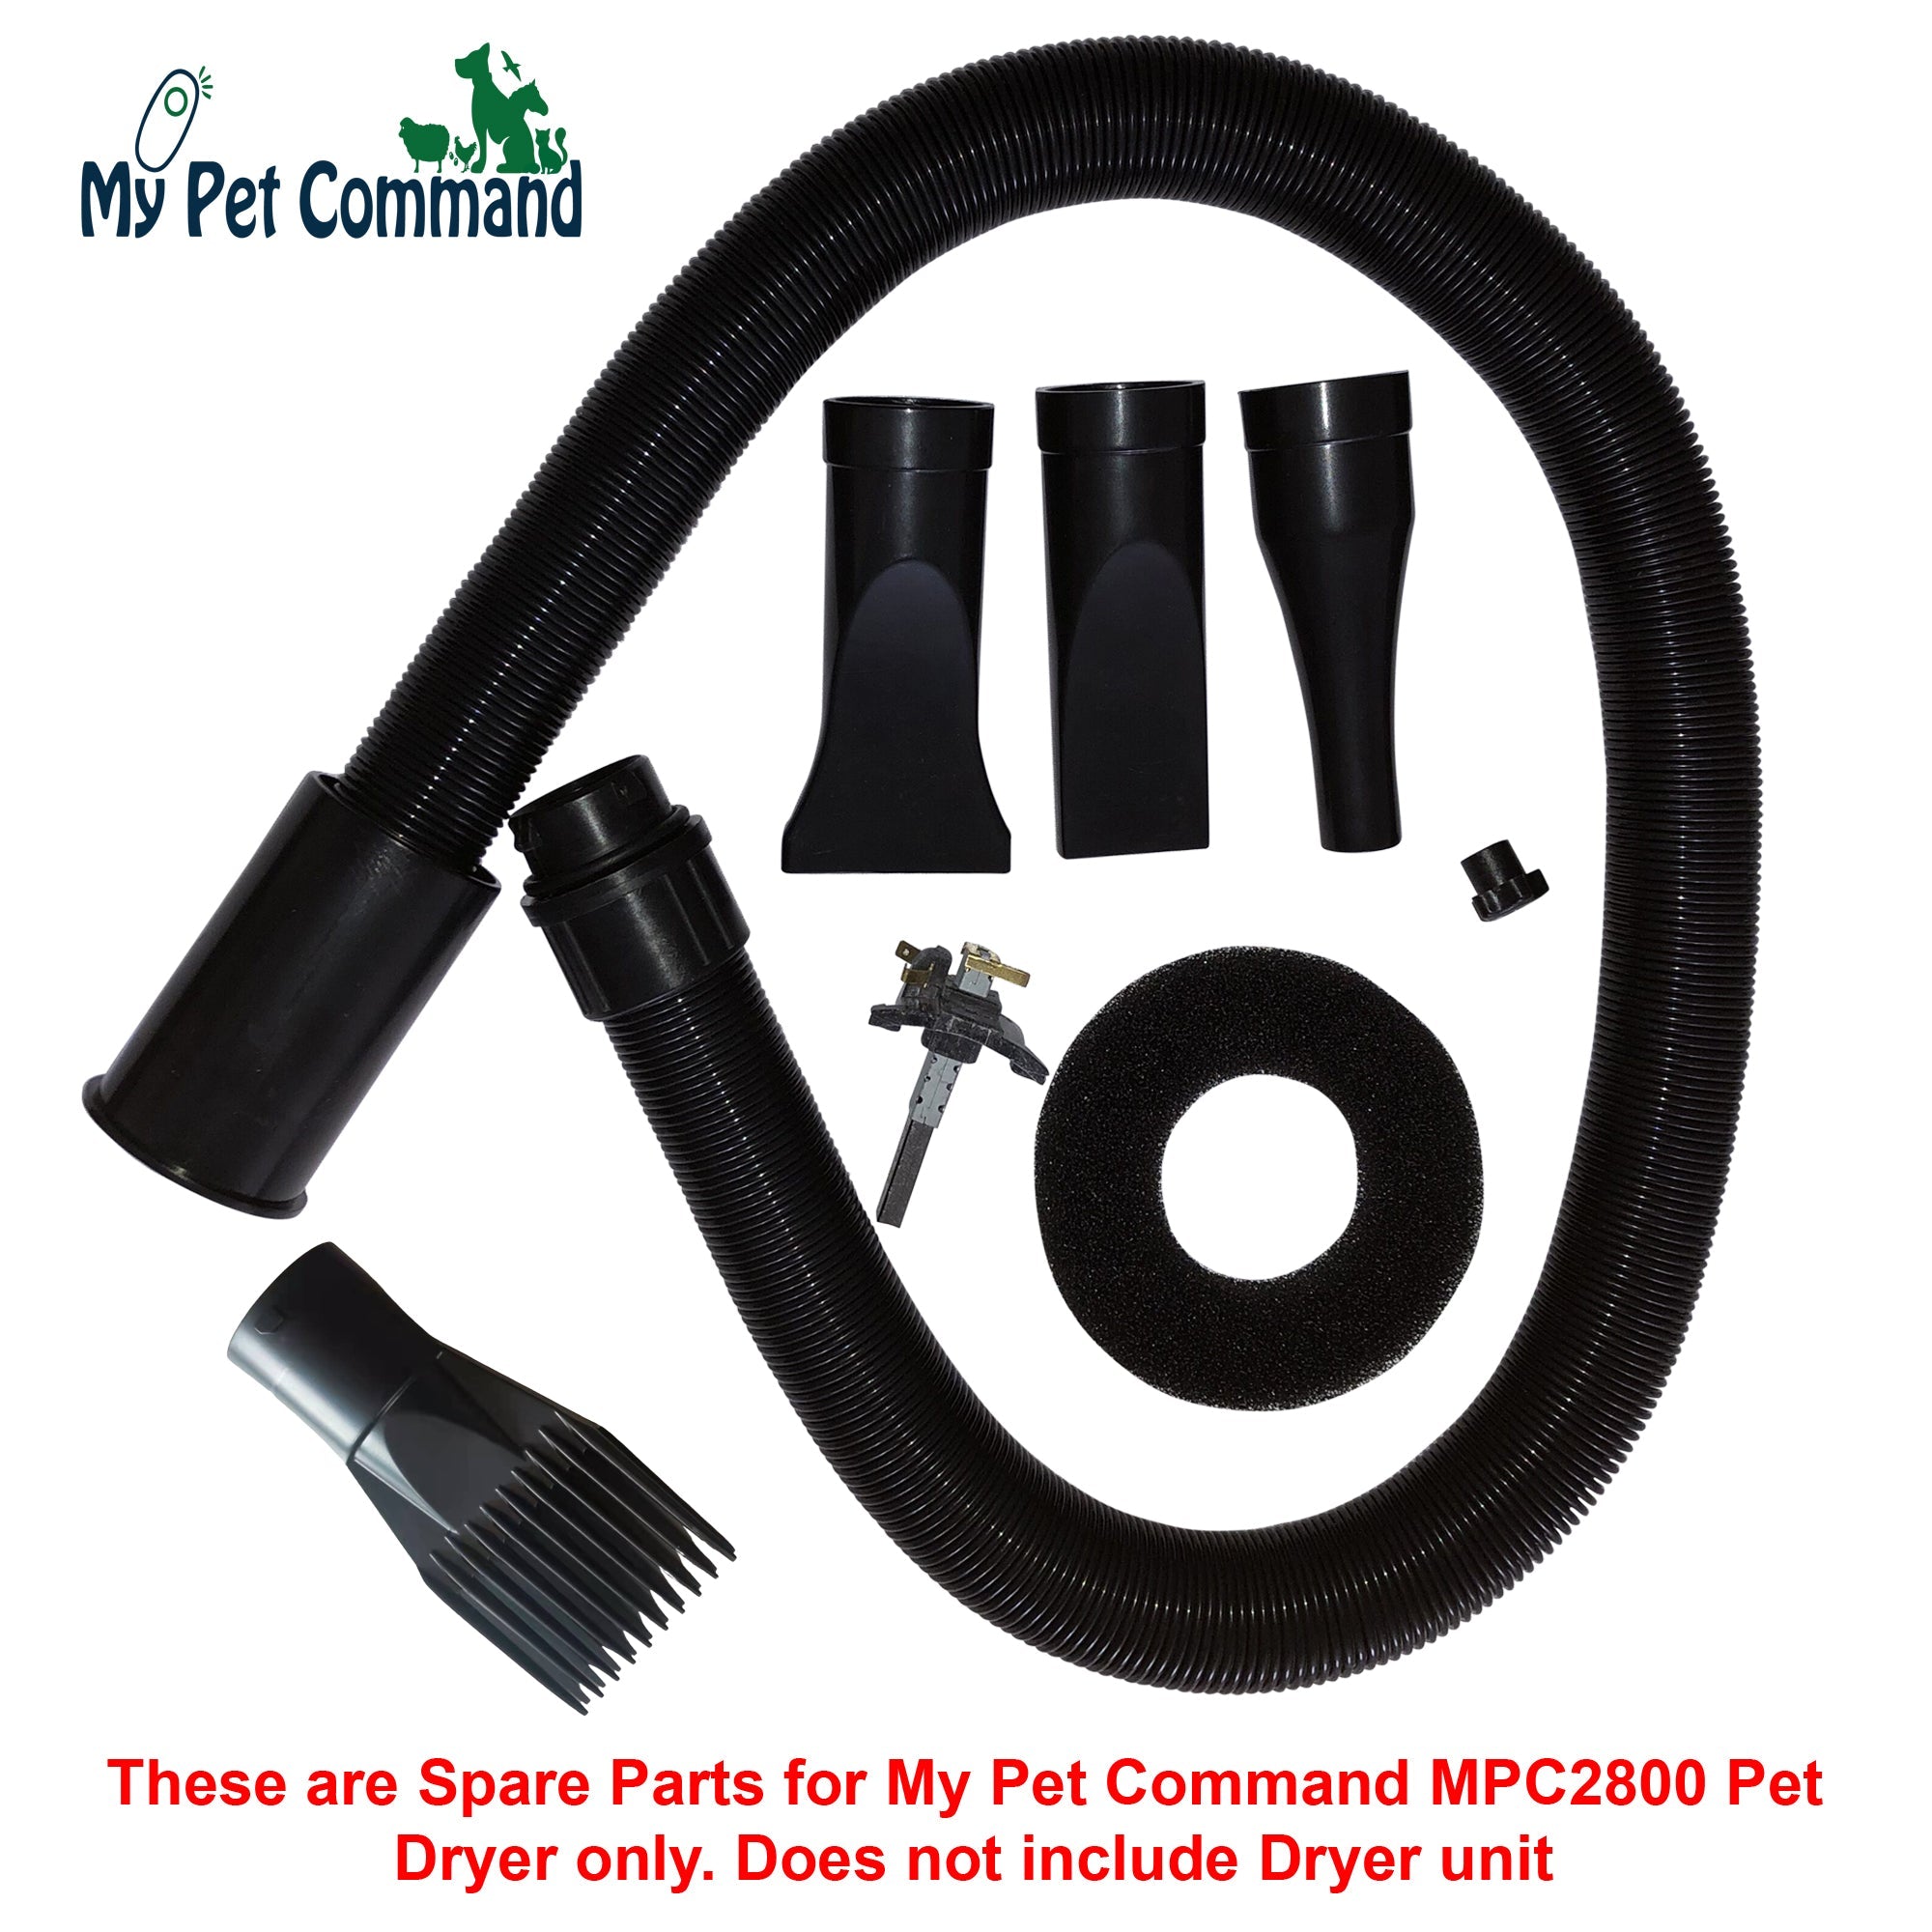 MY PET COMMAND PER DRYER SPARE PARTS ONLY FOR MY PETCOMMAND MPC2800 MODEL DRYER - My Pet Command